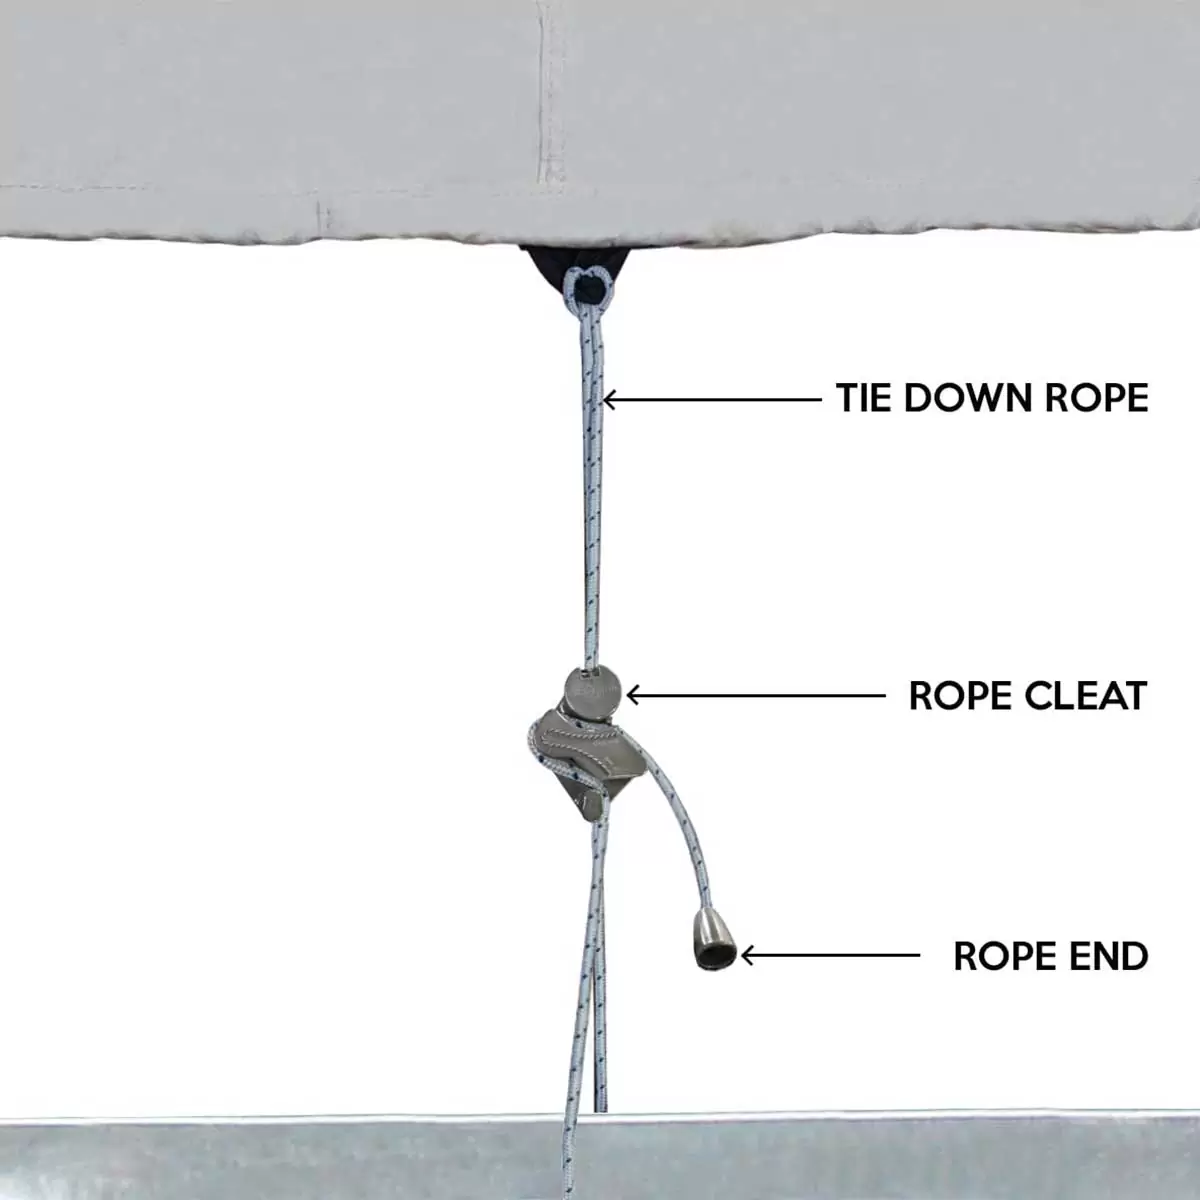 tie down rope cleat end